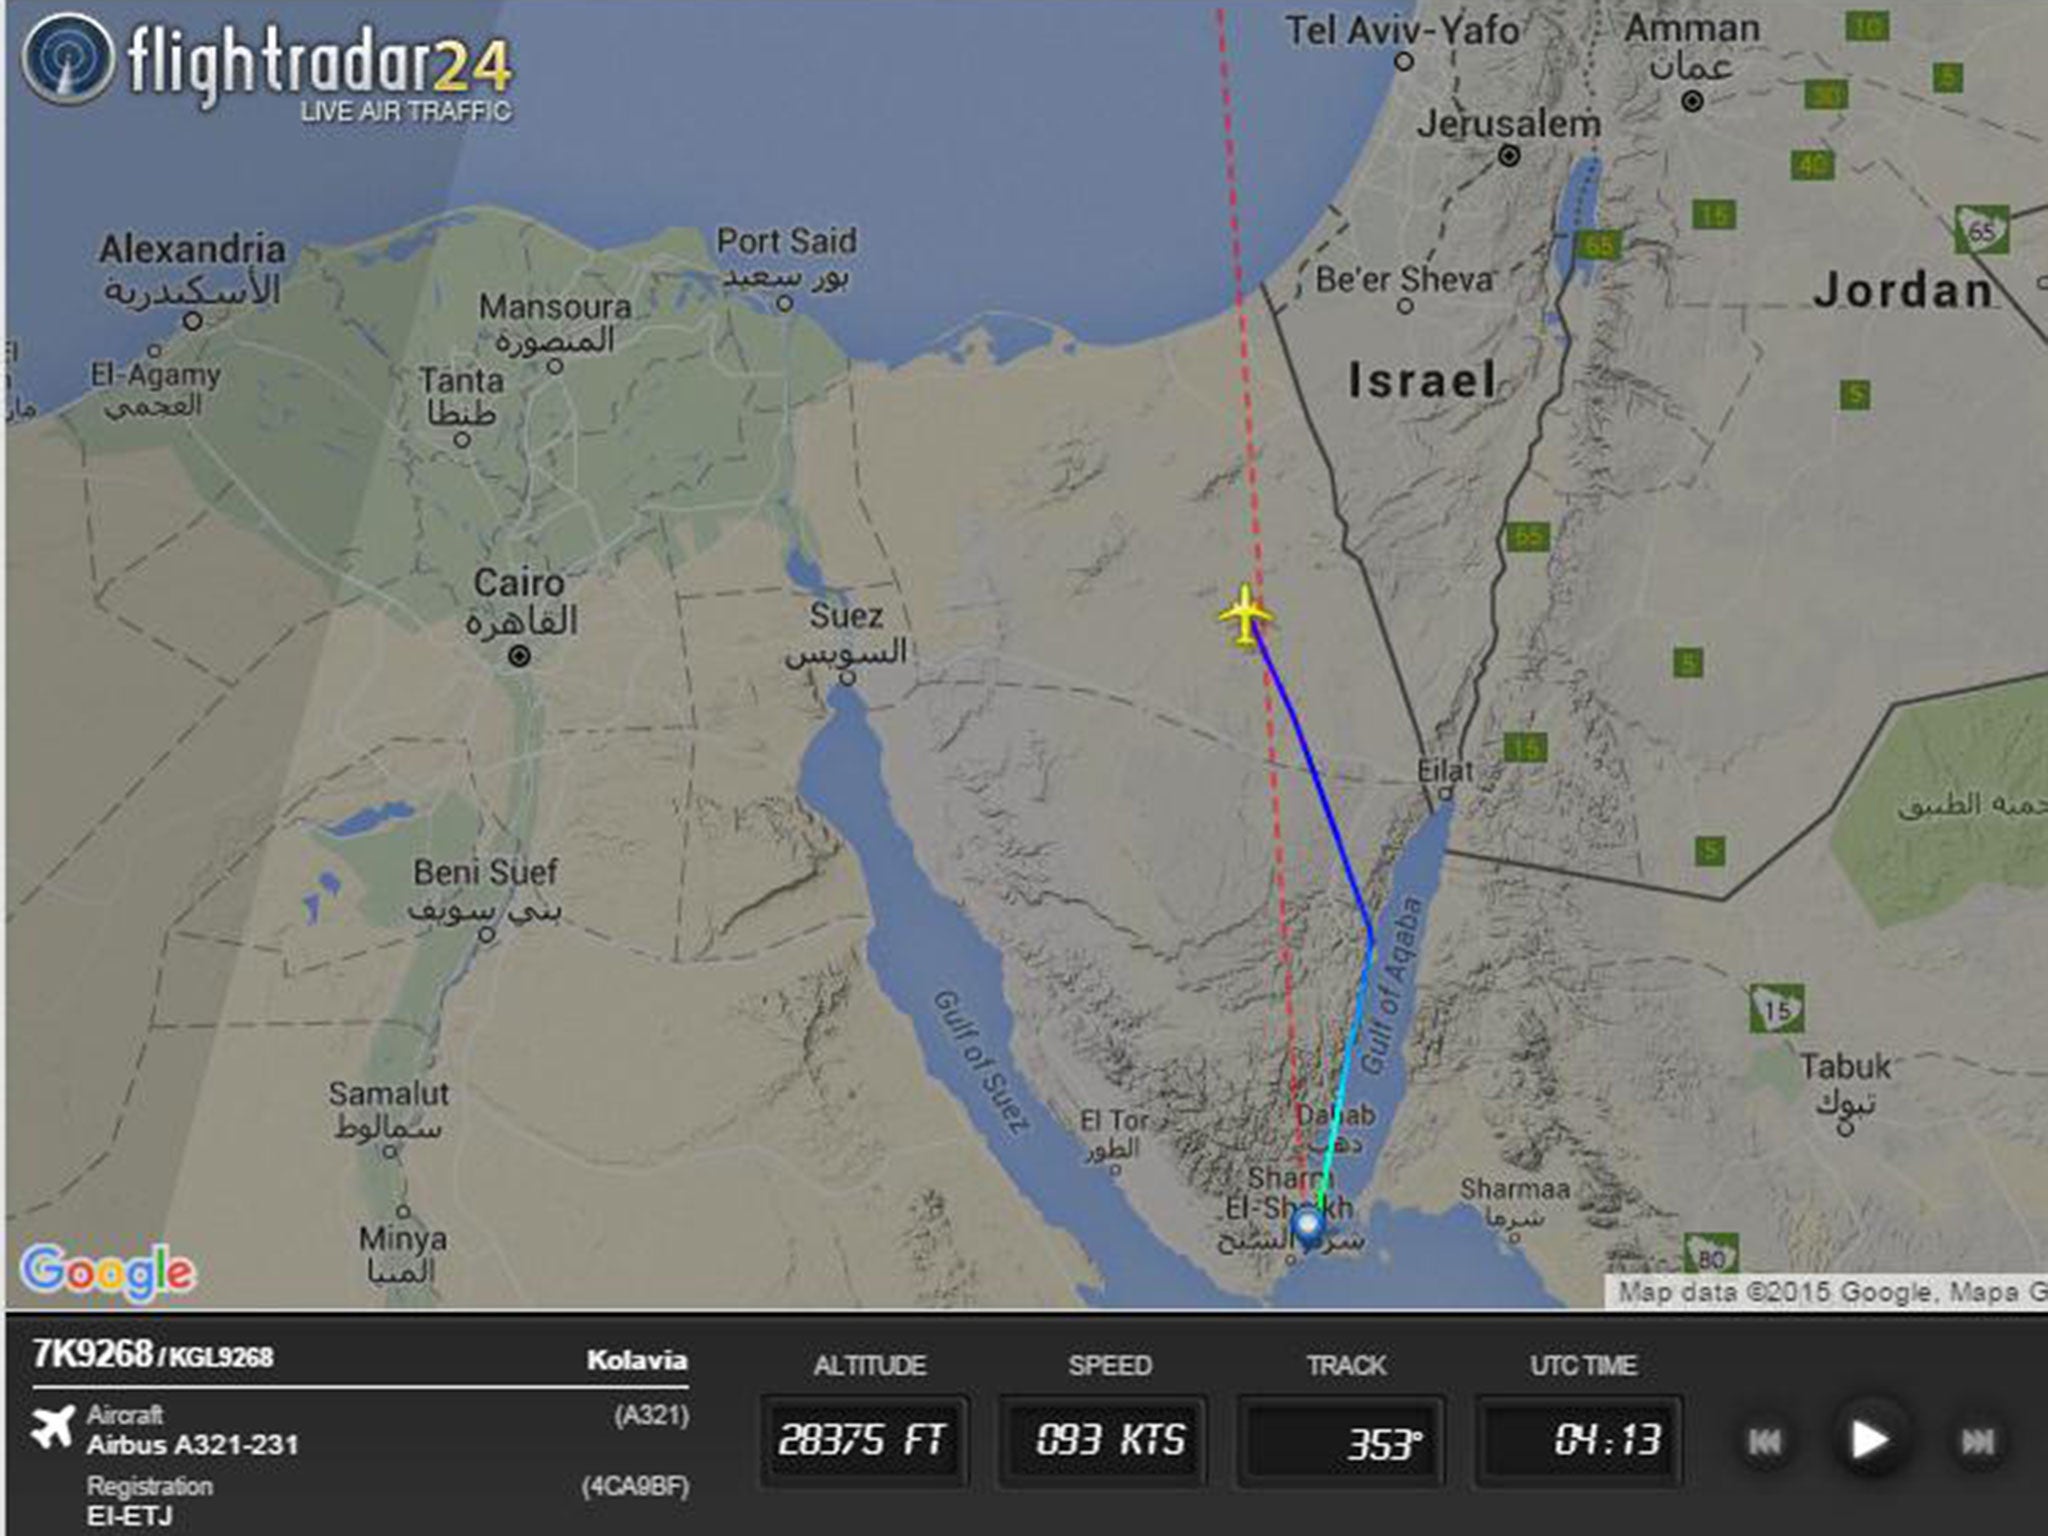 The plane's last recorded radar position above the northern Sinai peninsula